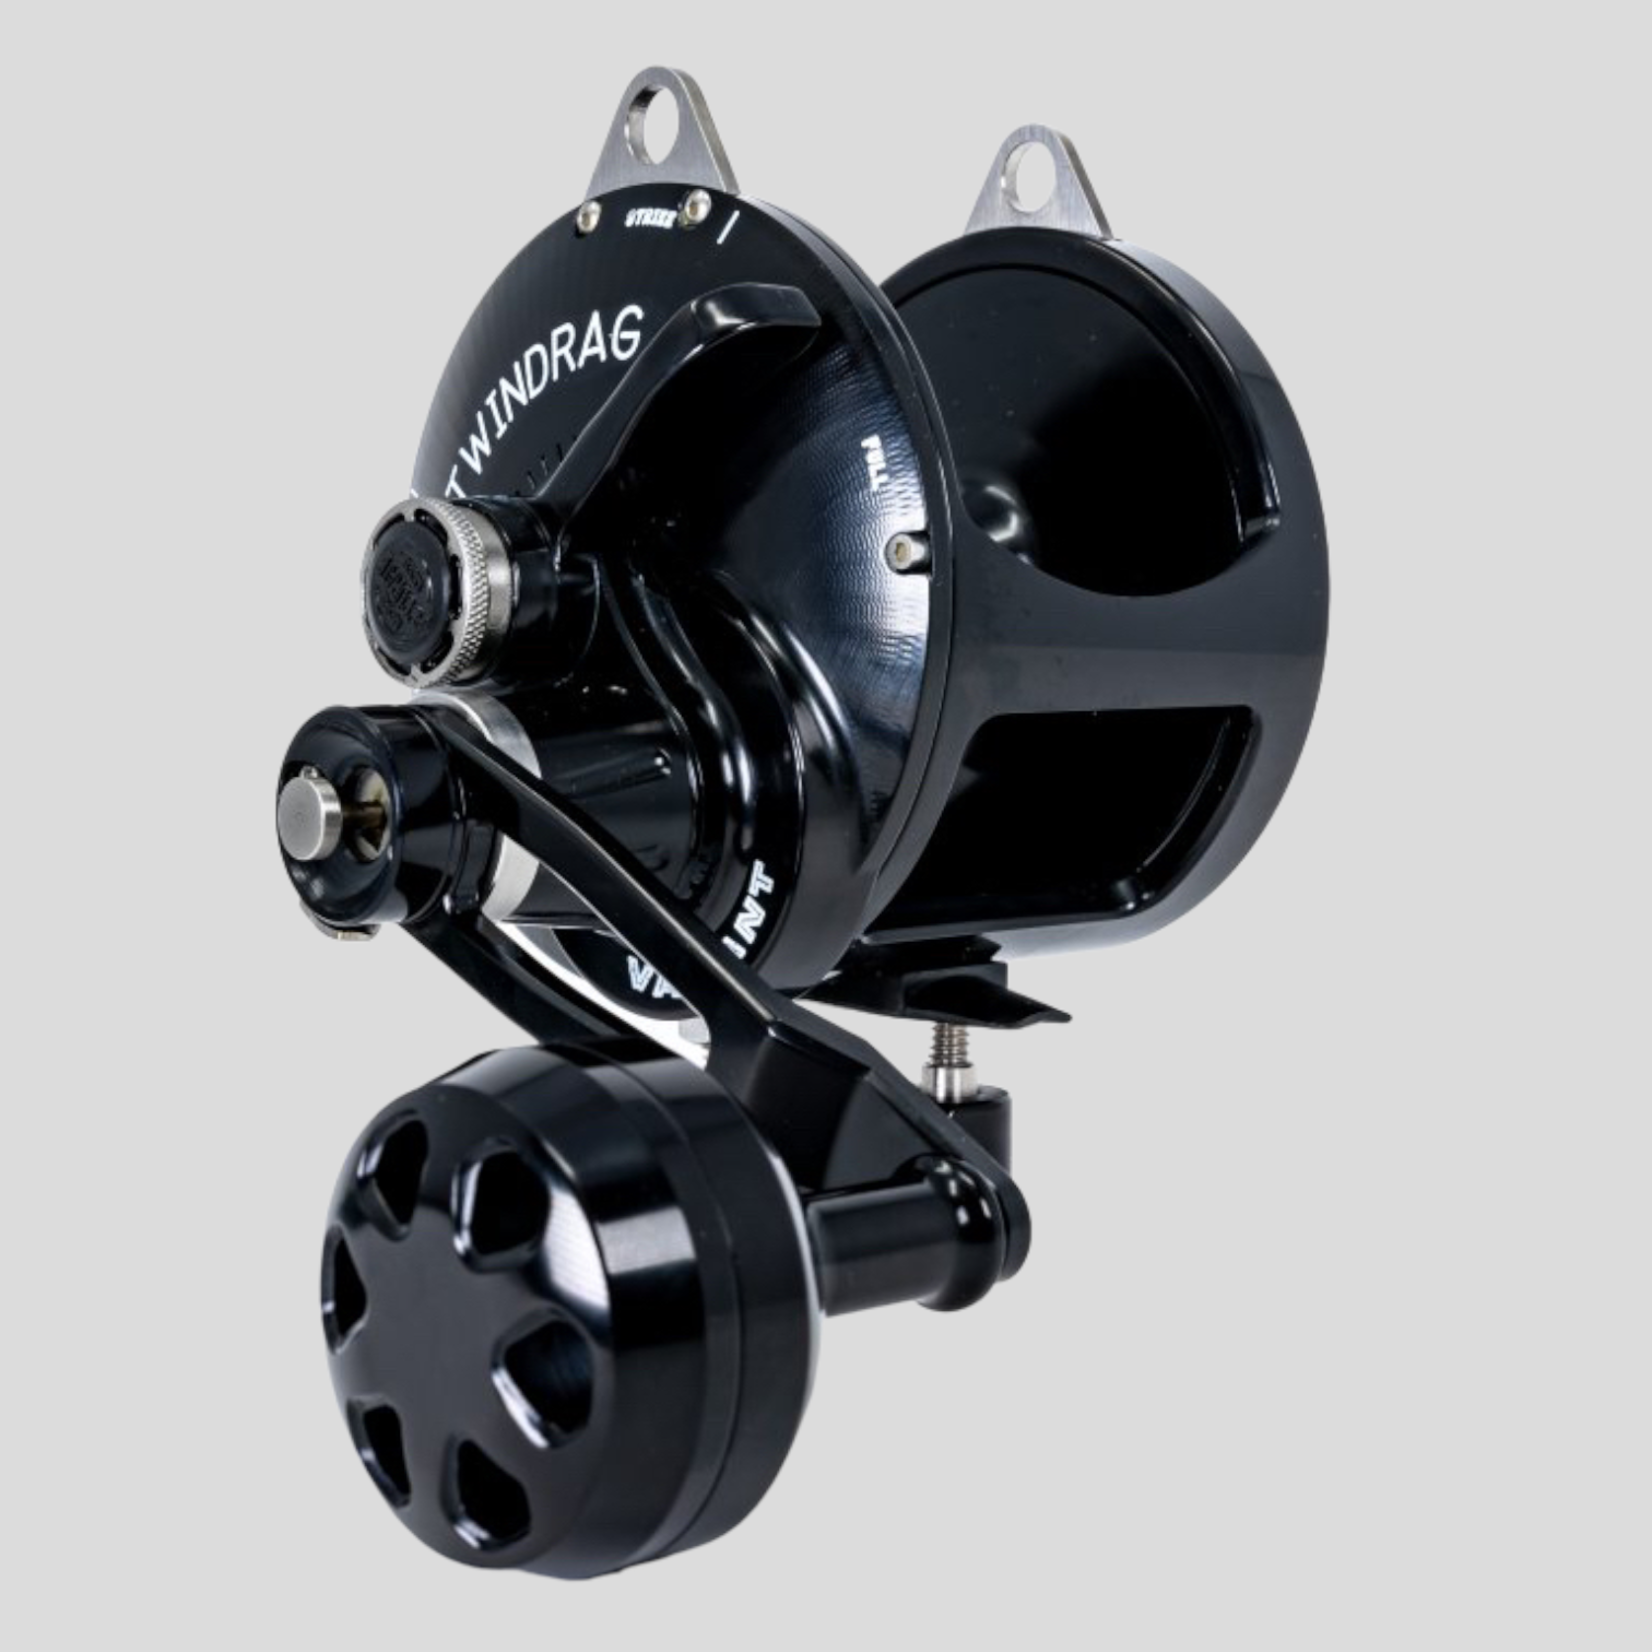 Accurate Valiant 2 Speed Fishing Reels | BV2-300CL-S